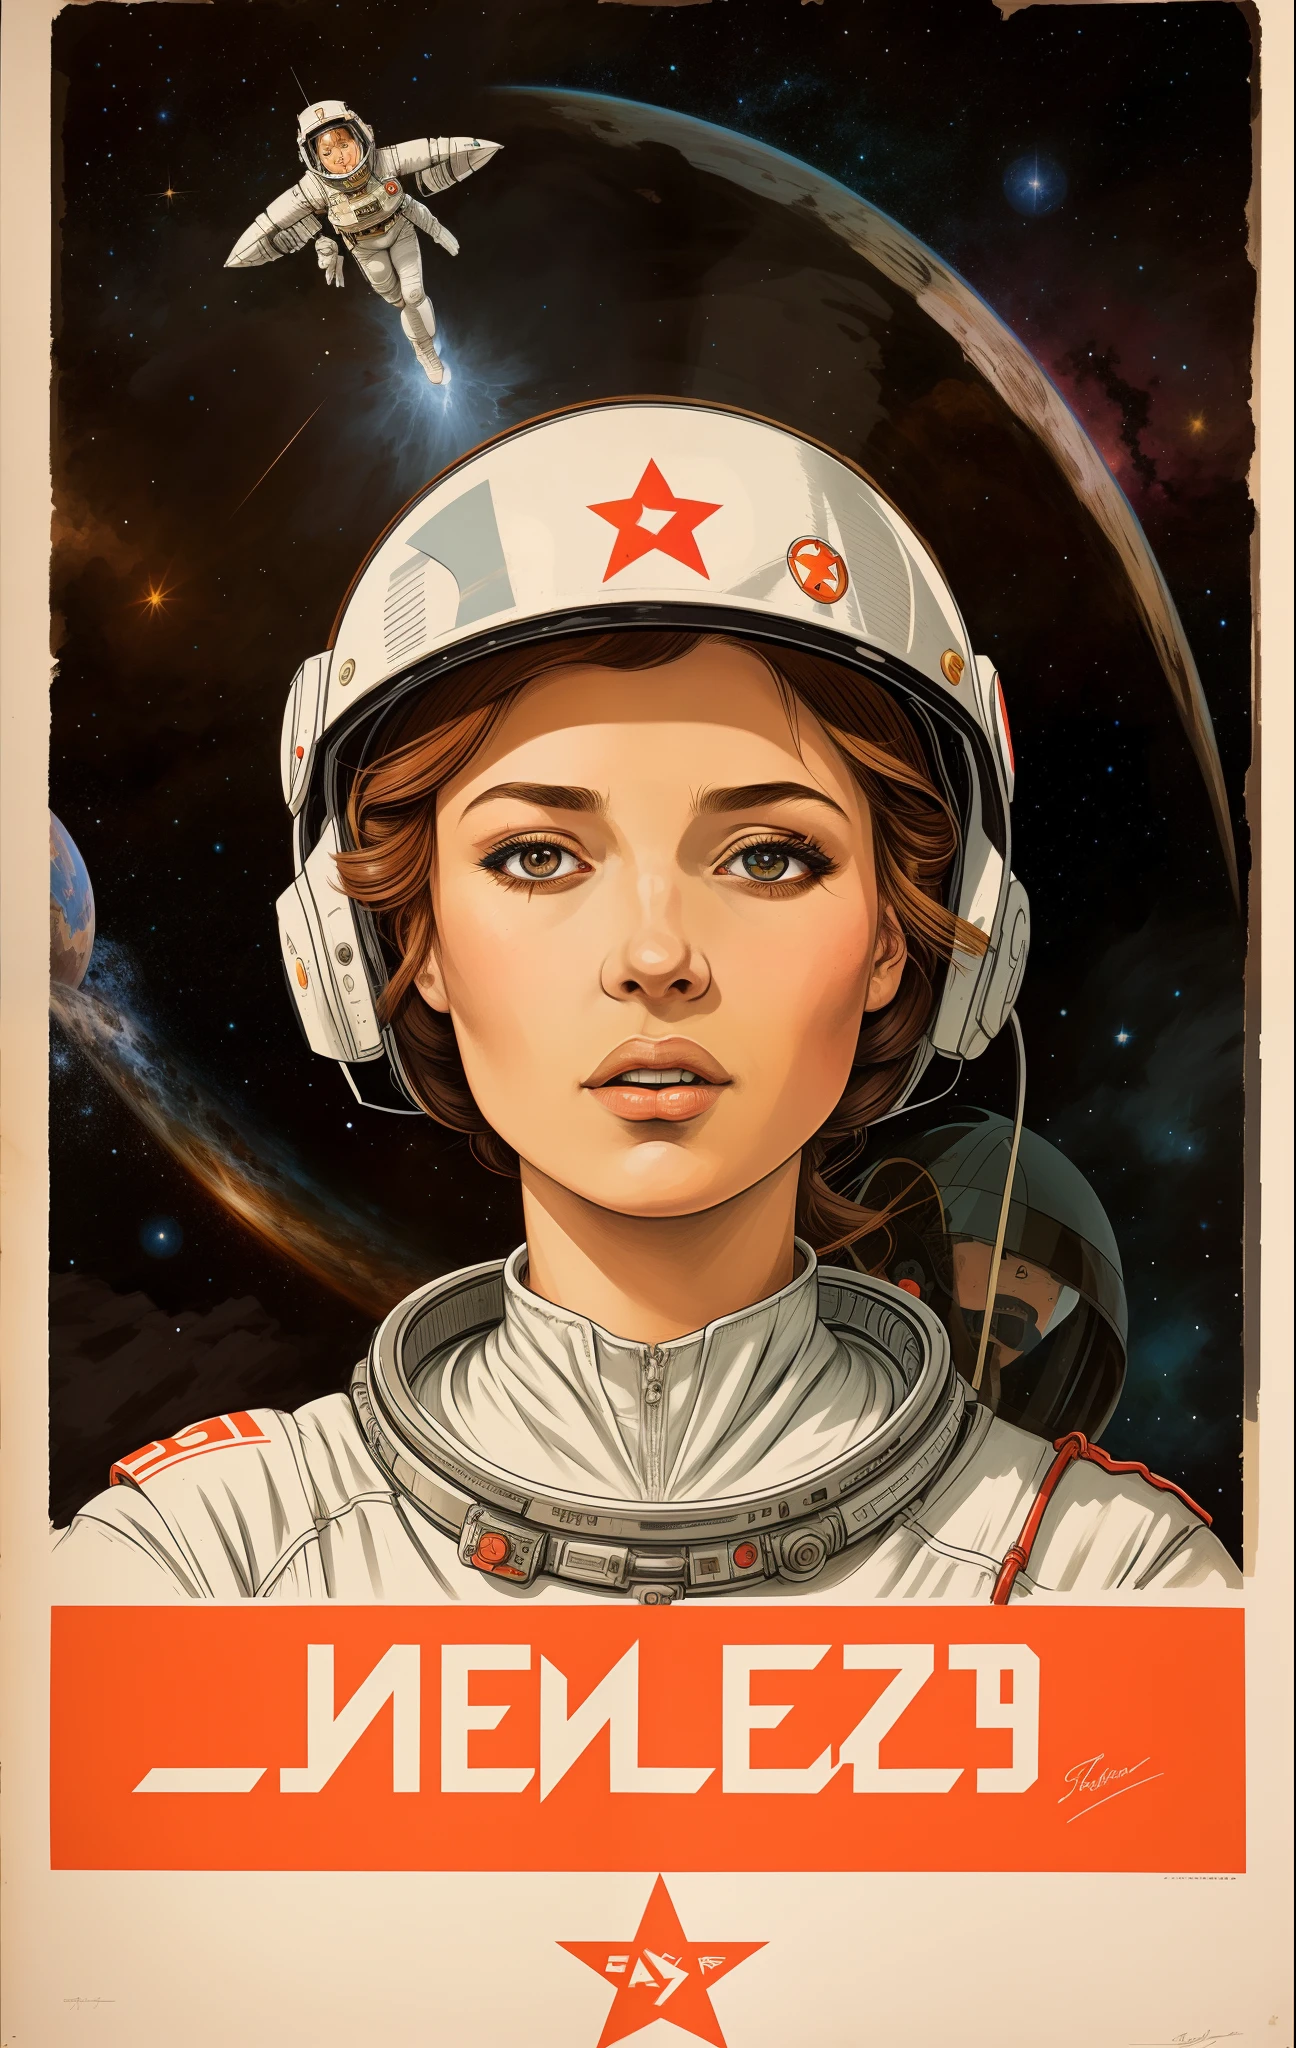 Shepherd  poster of girls wearing spacesuits，There is a star on the head，portrait anime space cadet girl，Artgerm JSC，jen bartel，Space Girl，soviet propaganda poster style，Retrato Armored Astronauta ，soviet propaganda art，Soviet propaganda style，Soviet propaganda，Guviz-style artwork，Sergey Zabelin，The astronaut